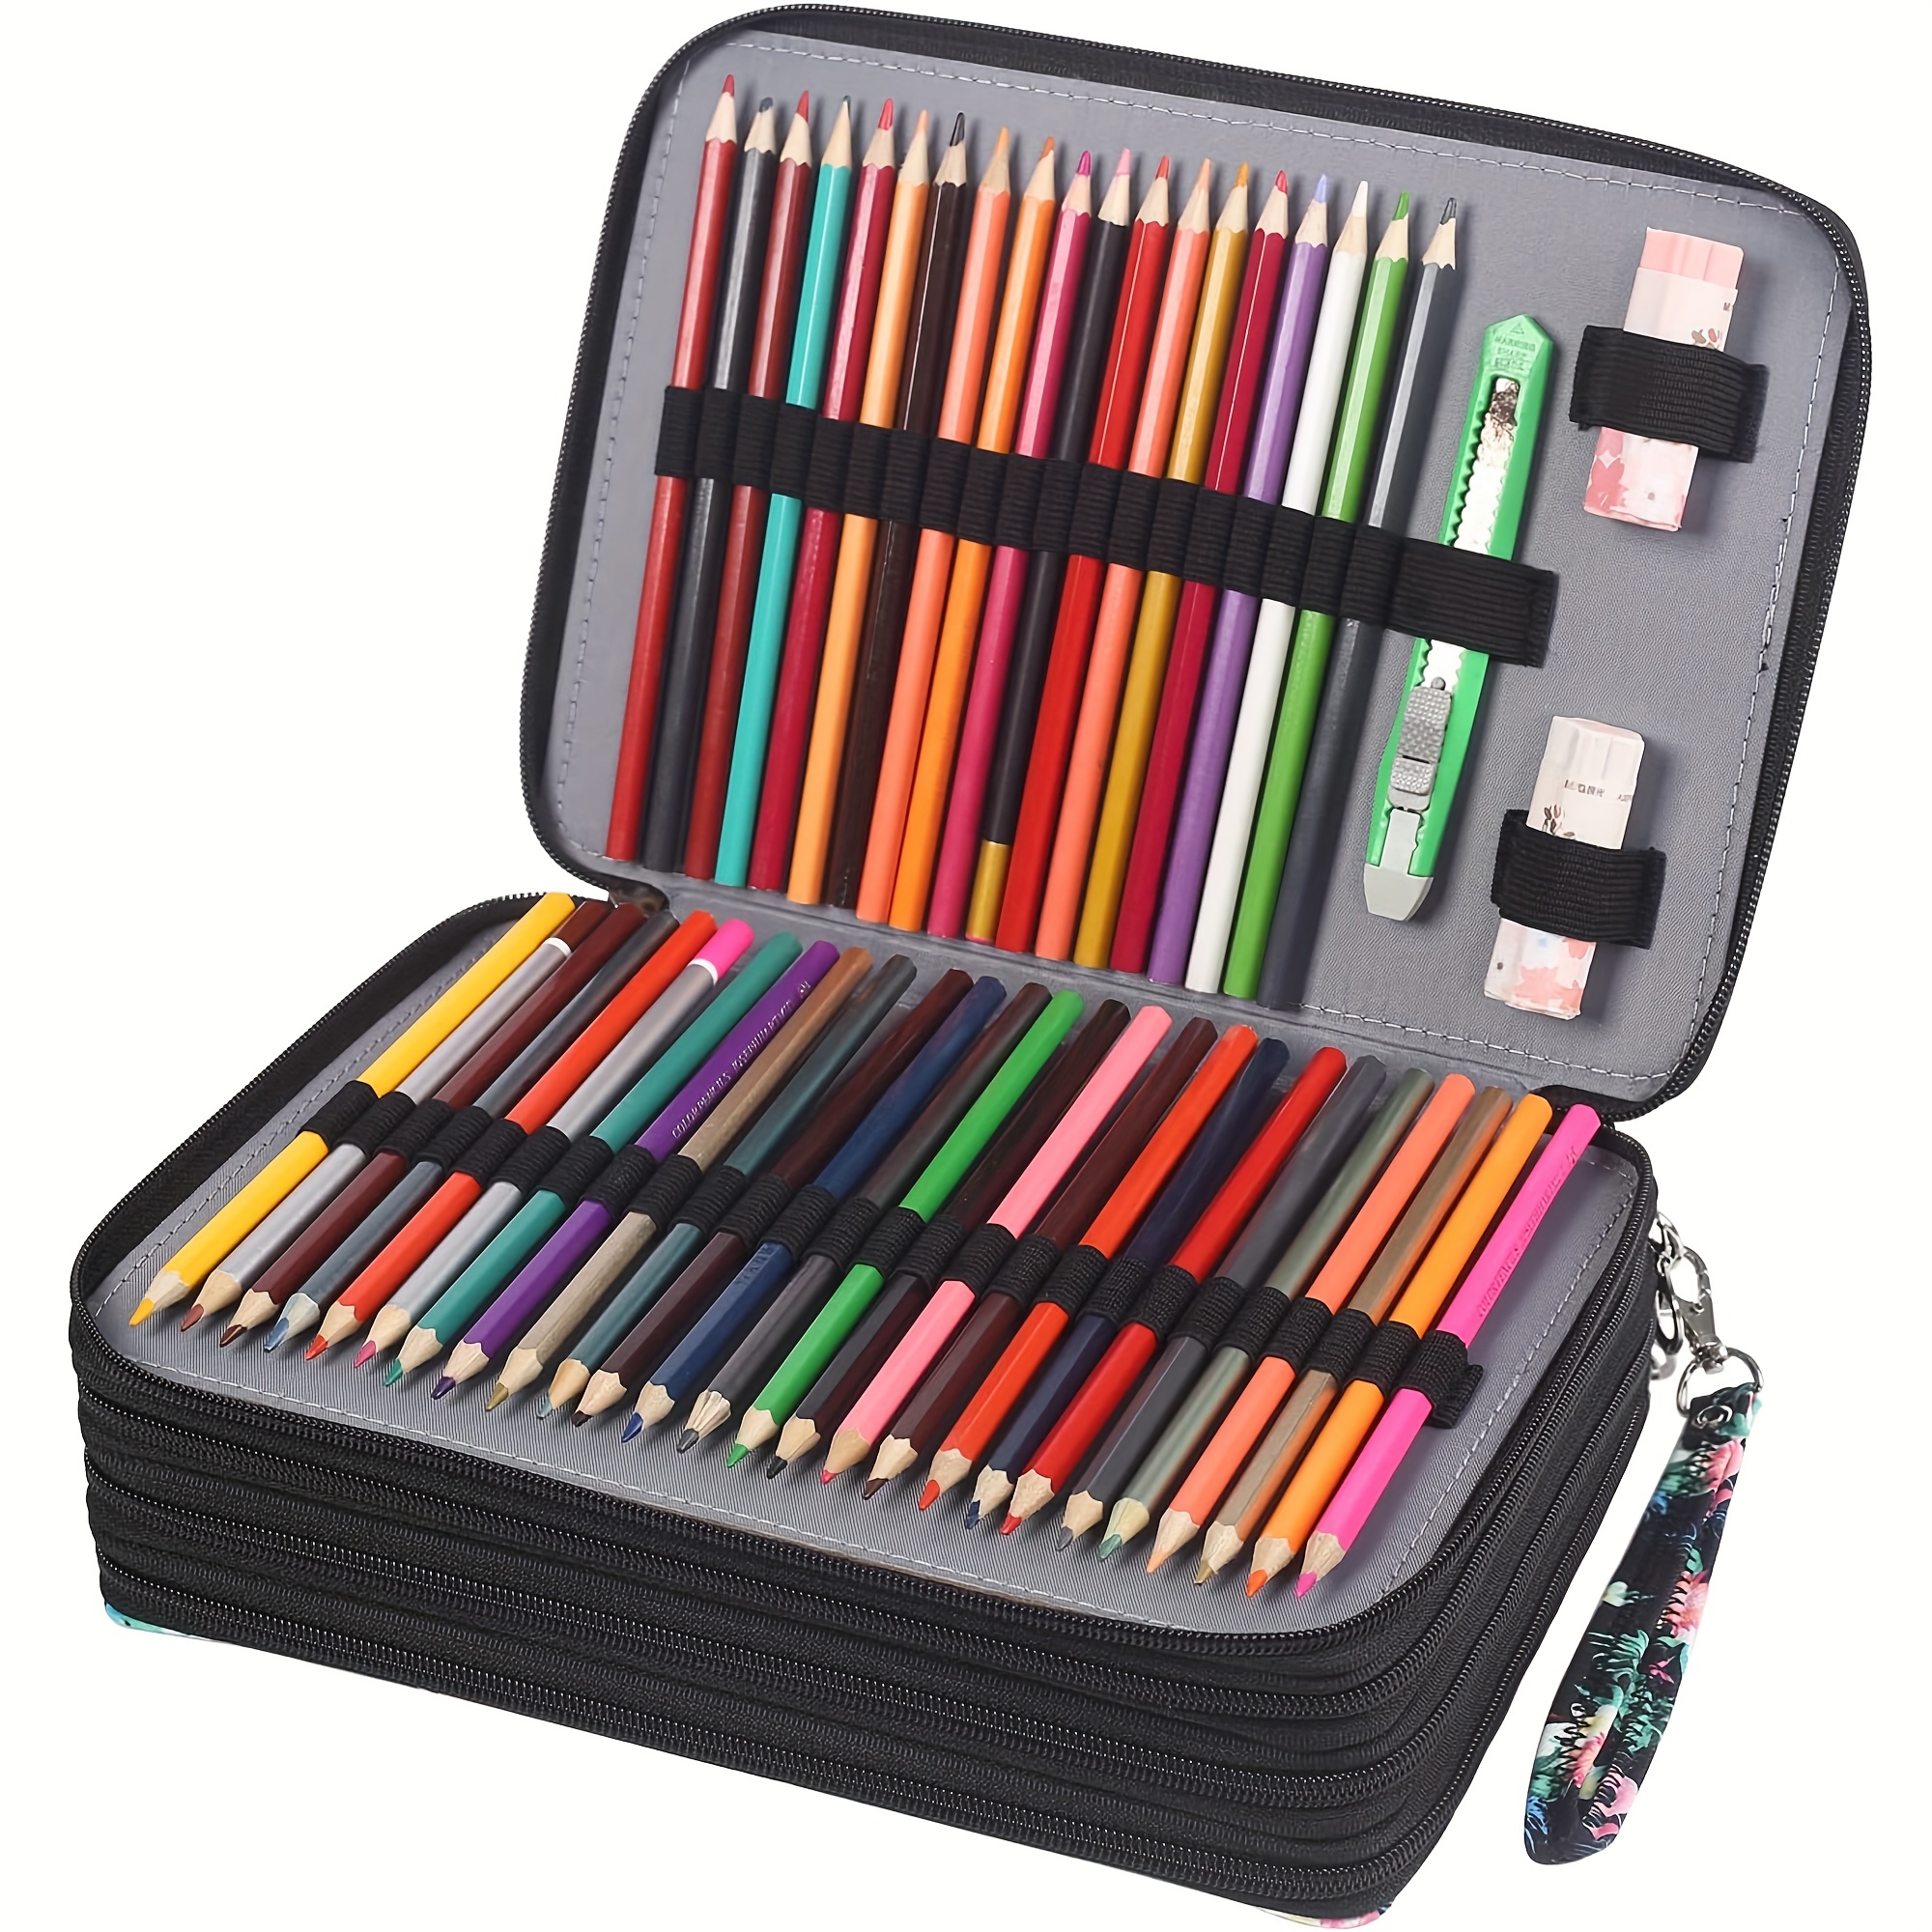 Vomgomfom Colored Pencil Case - 200 Slots Pencil Holder with Zipper Closure Twill Fabric Large Capacity Pencil Case for Watercolor Pens or Markers